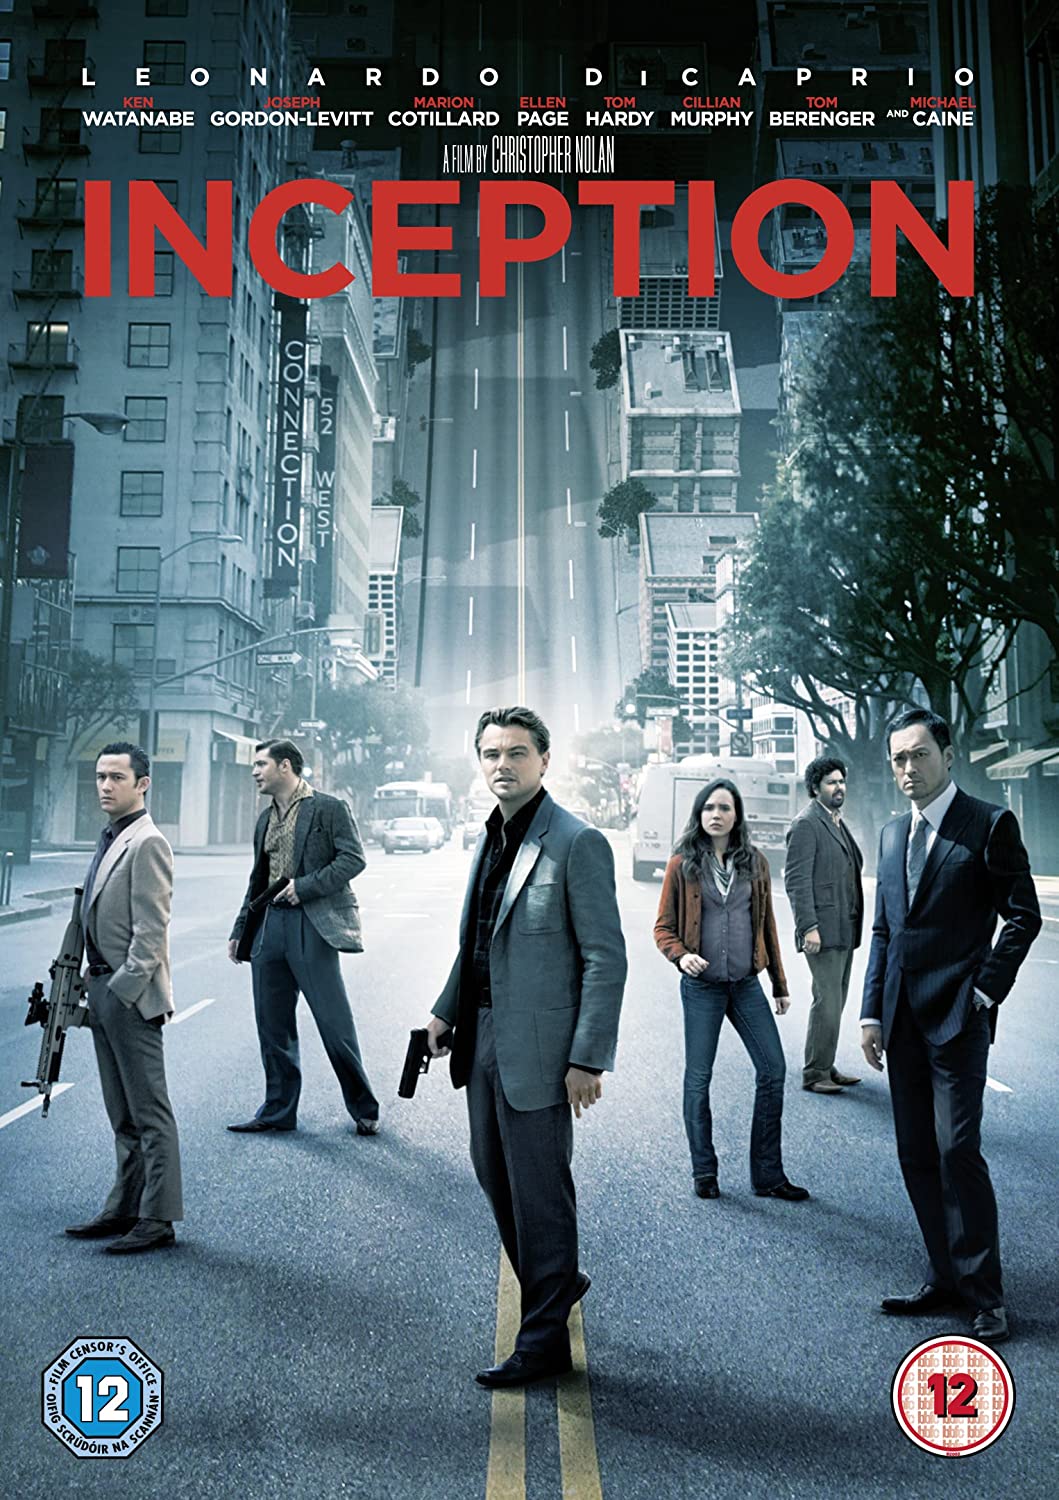 Inception - Action/Sci-fi [DVD]